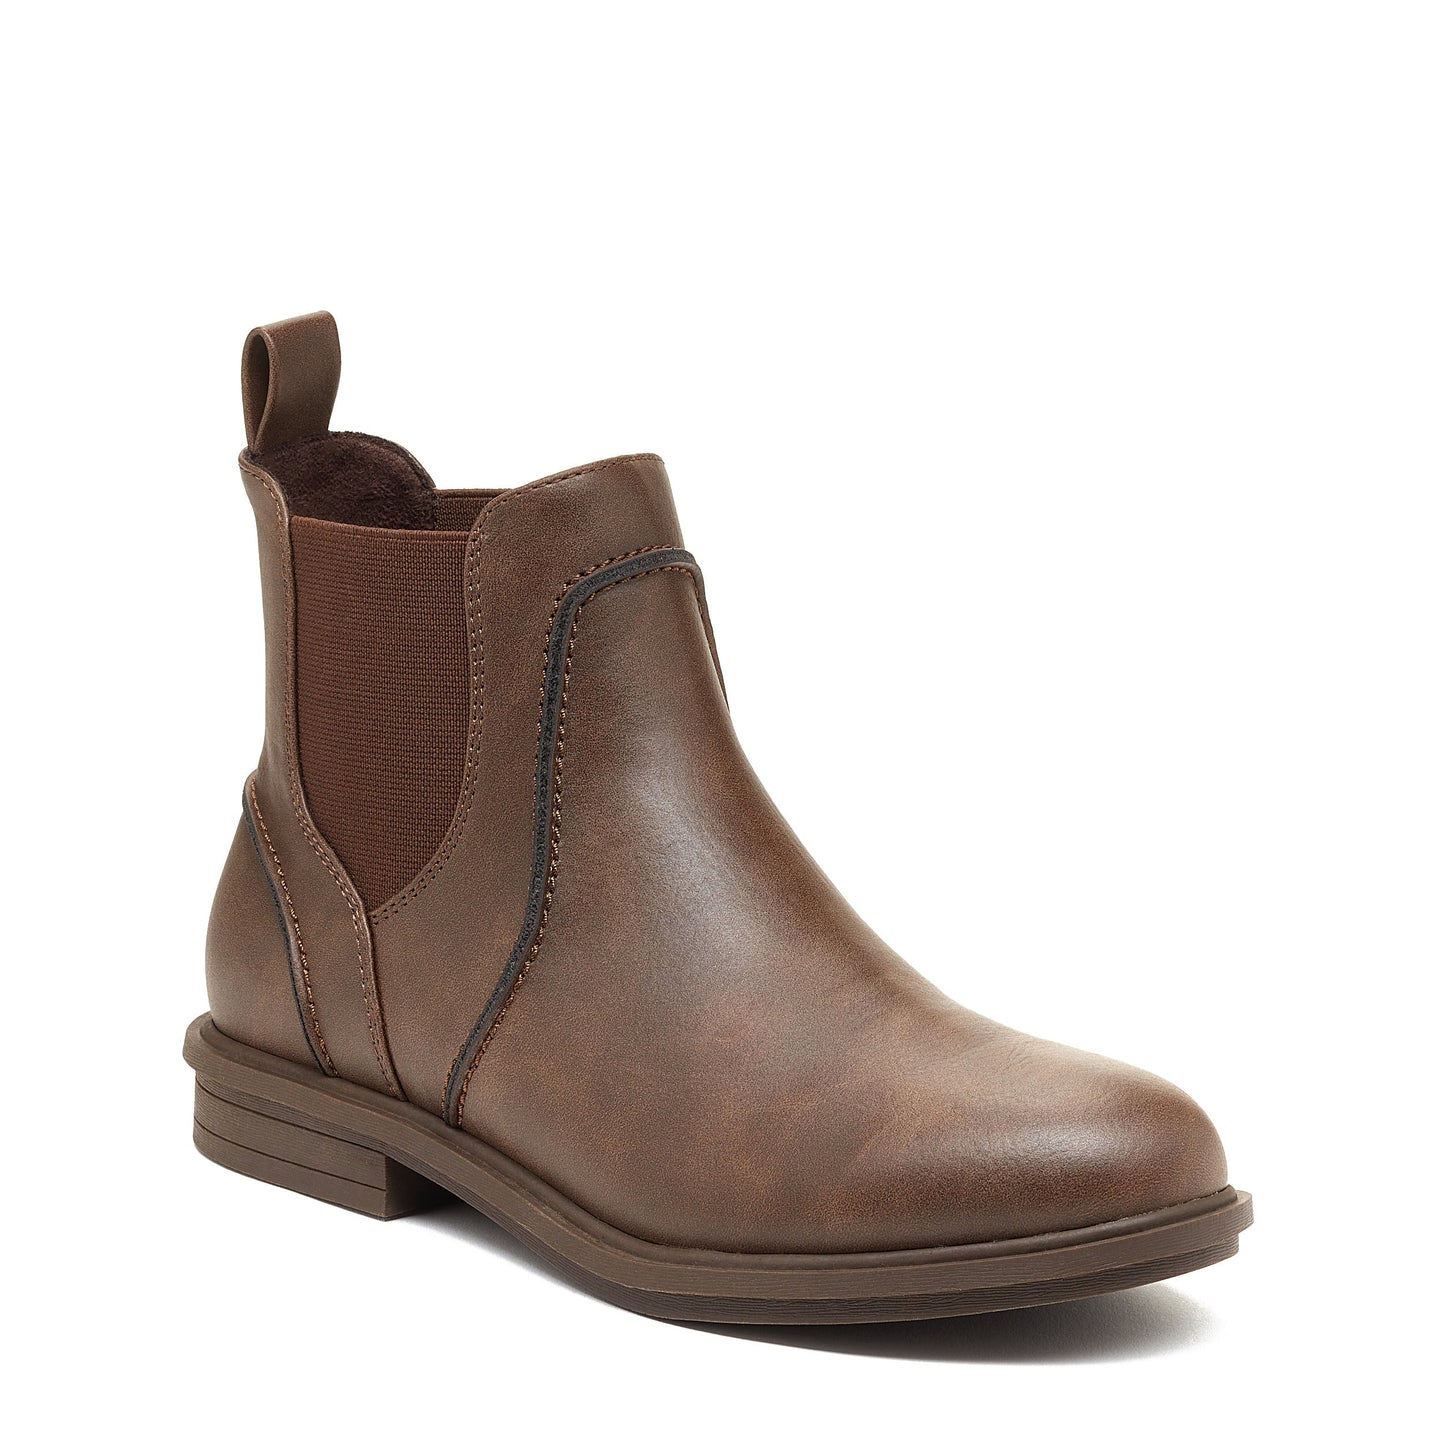 Rocket Dog® Women's Gilly Brown Chelsea Boot